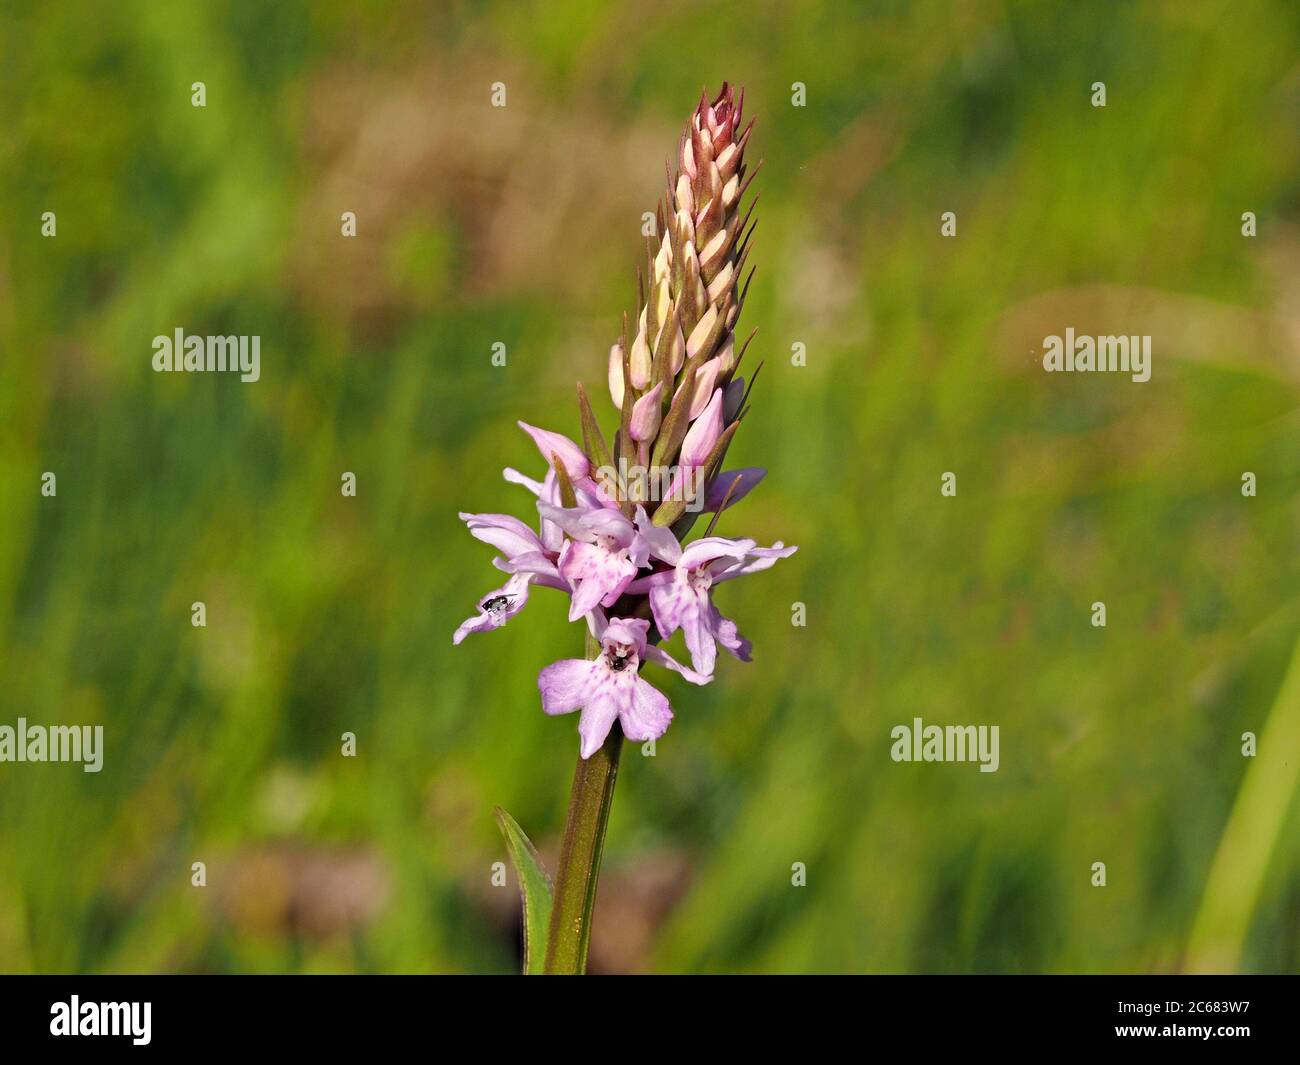 tiny insects on flowers of Common Spotted Orchid (Dactylorhiza fuchsia - possible x with Fragrant Orchid Gymnadenia conopsea) in Cumbria, England, UK Stock Photo